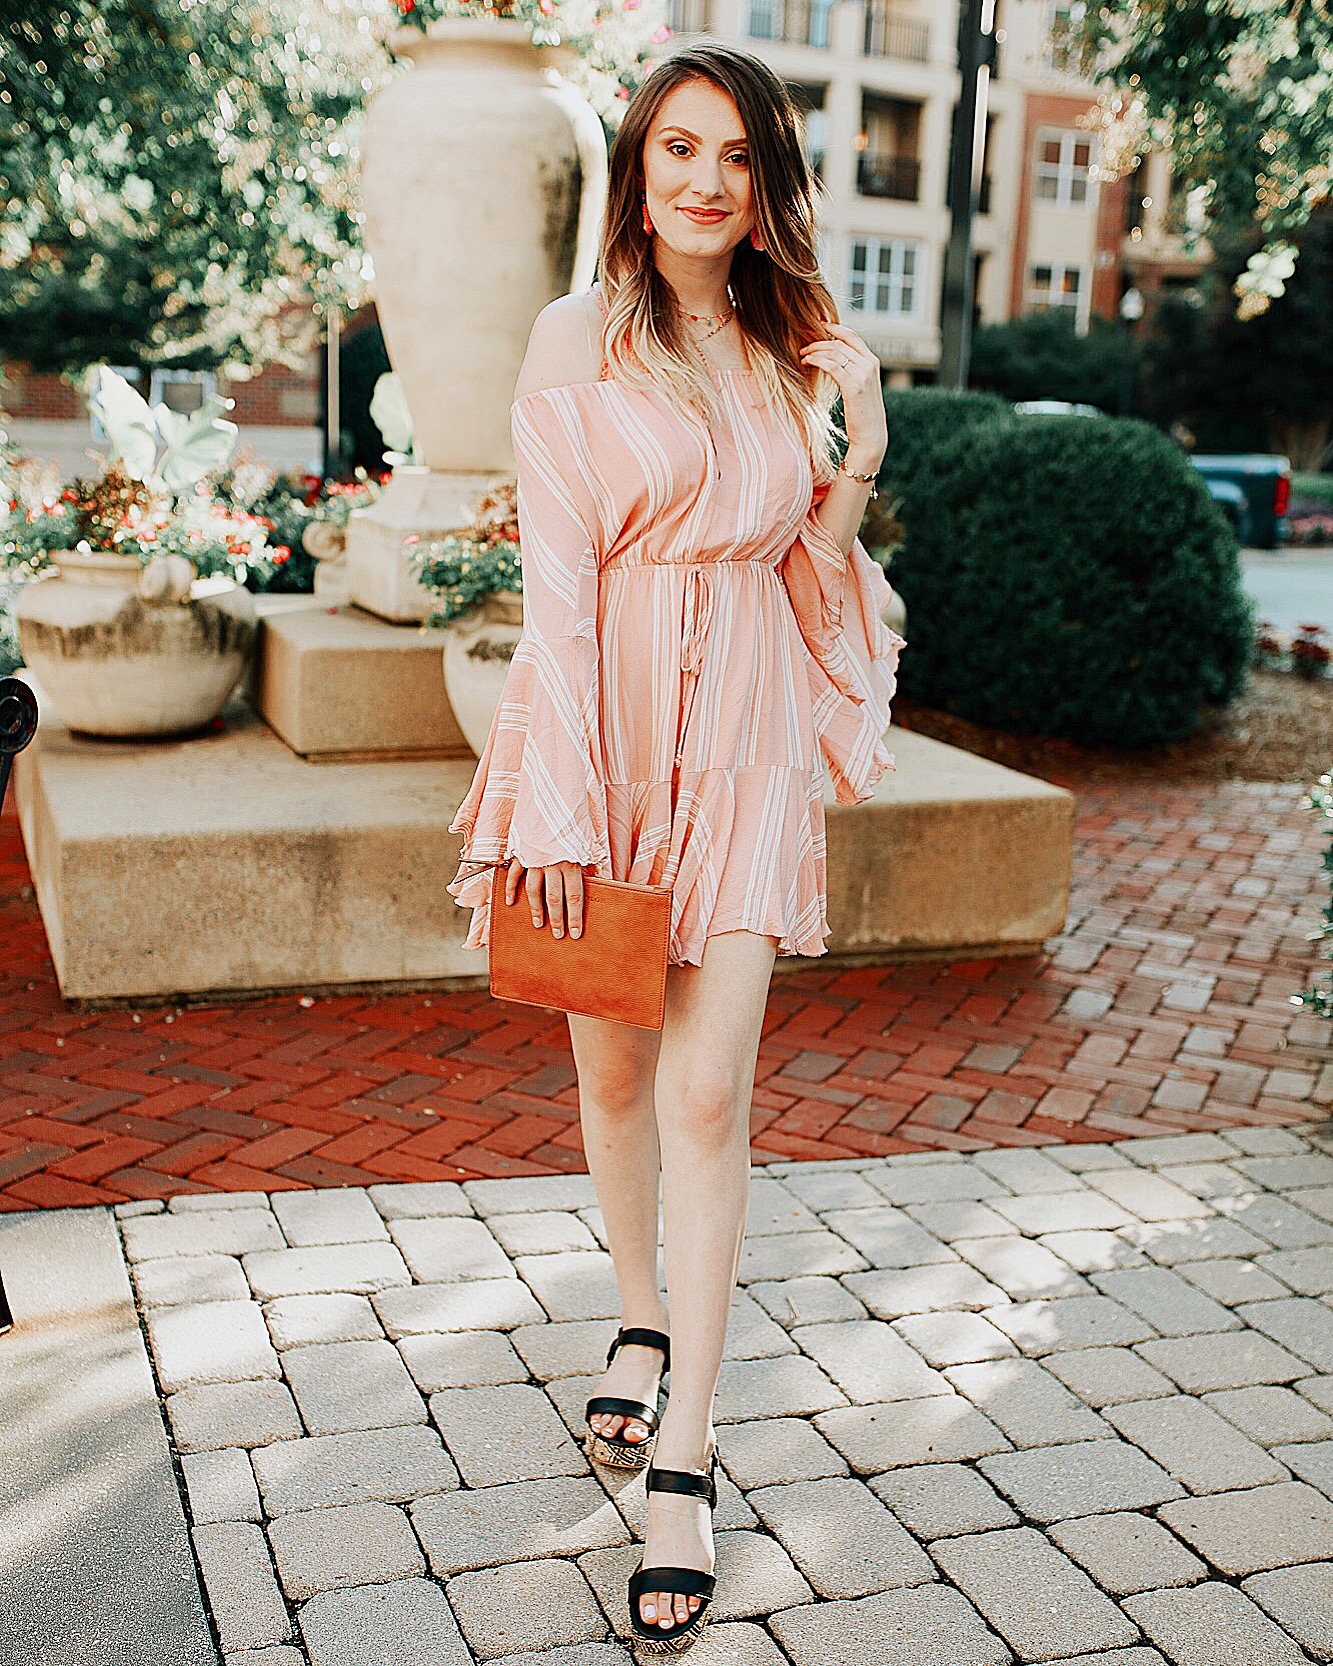 Pink bell sleeve romper with white stripes from Copper Bloom, layered tassel necklace from Baublebar, tassel earrings from Siam Hills Tribe, clutch from Anne Taylor. Summer outfit inspiration styles by North Carolina fashion and lifestyle blogger Jessica Linn.